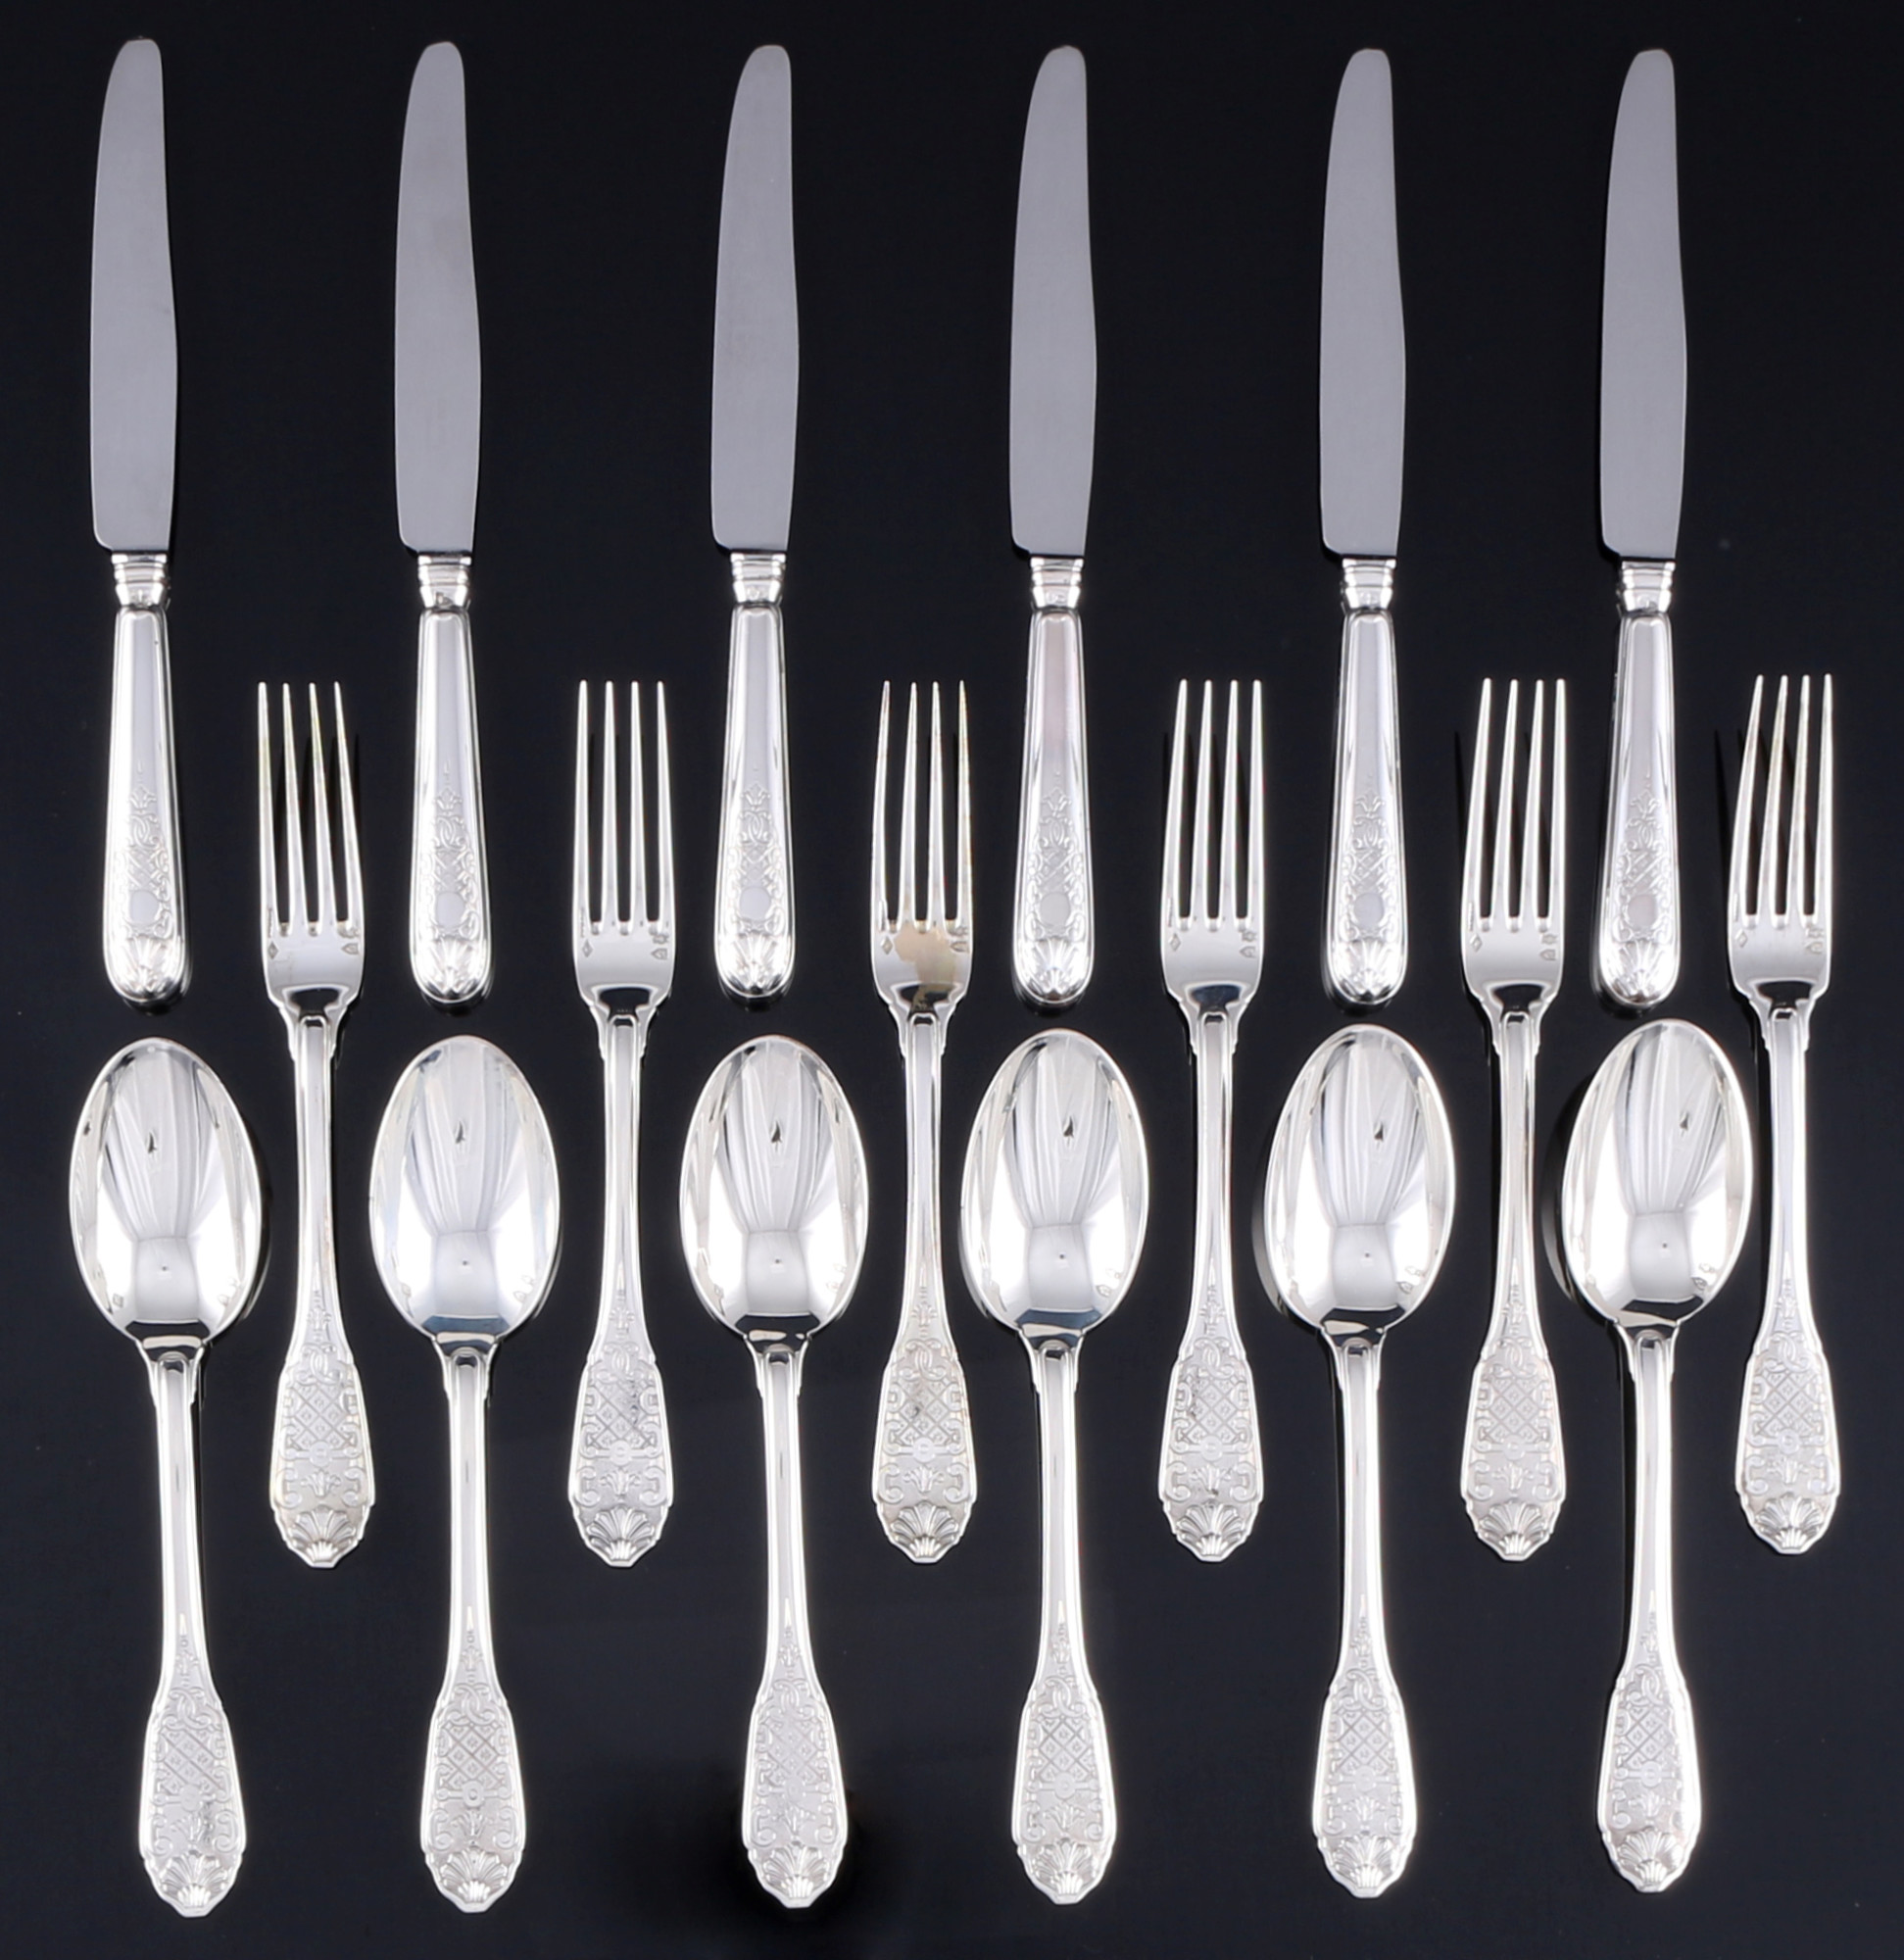 Christofle Royal Cisele 925 sterling silver cutlery for 6 persons, Silber Besteck für 6 Personen,